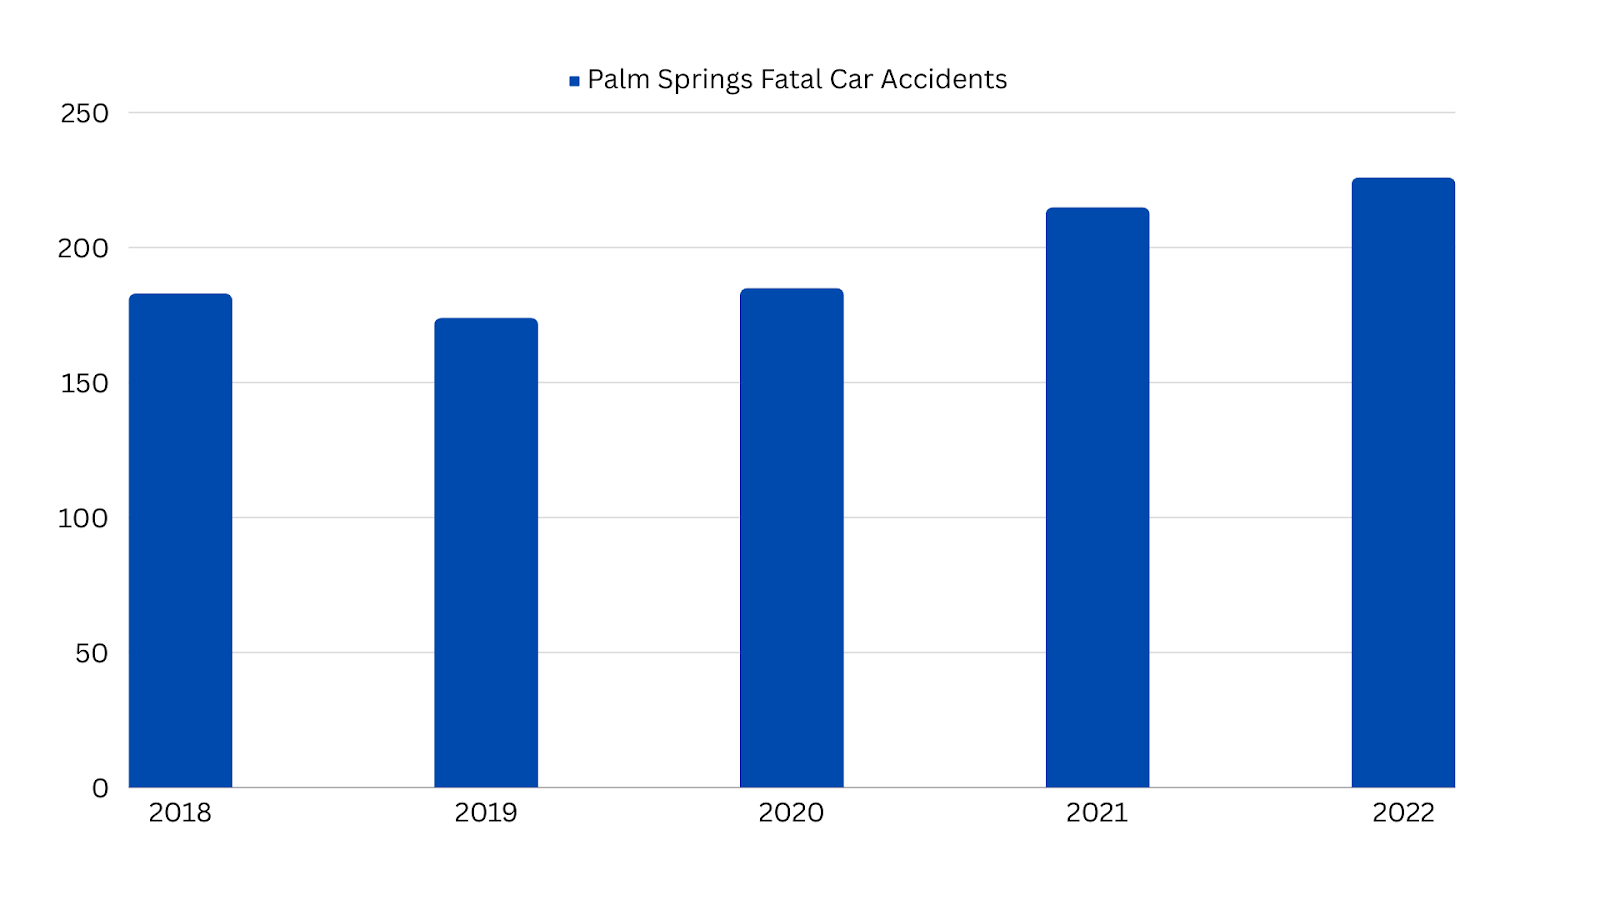 Palm Springs Fatal Car Accidents